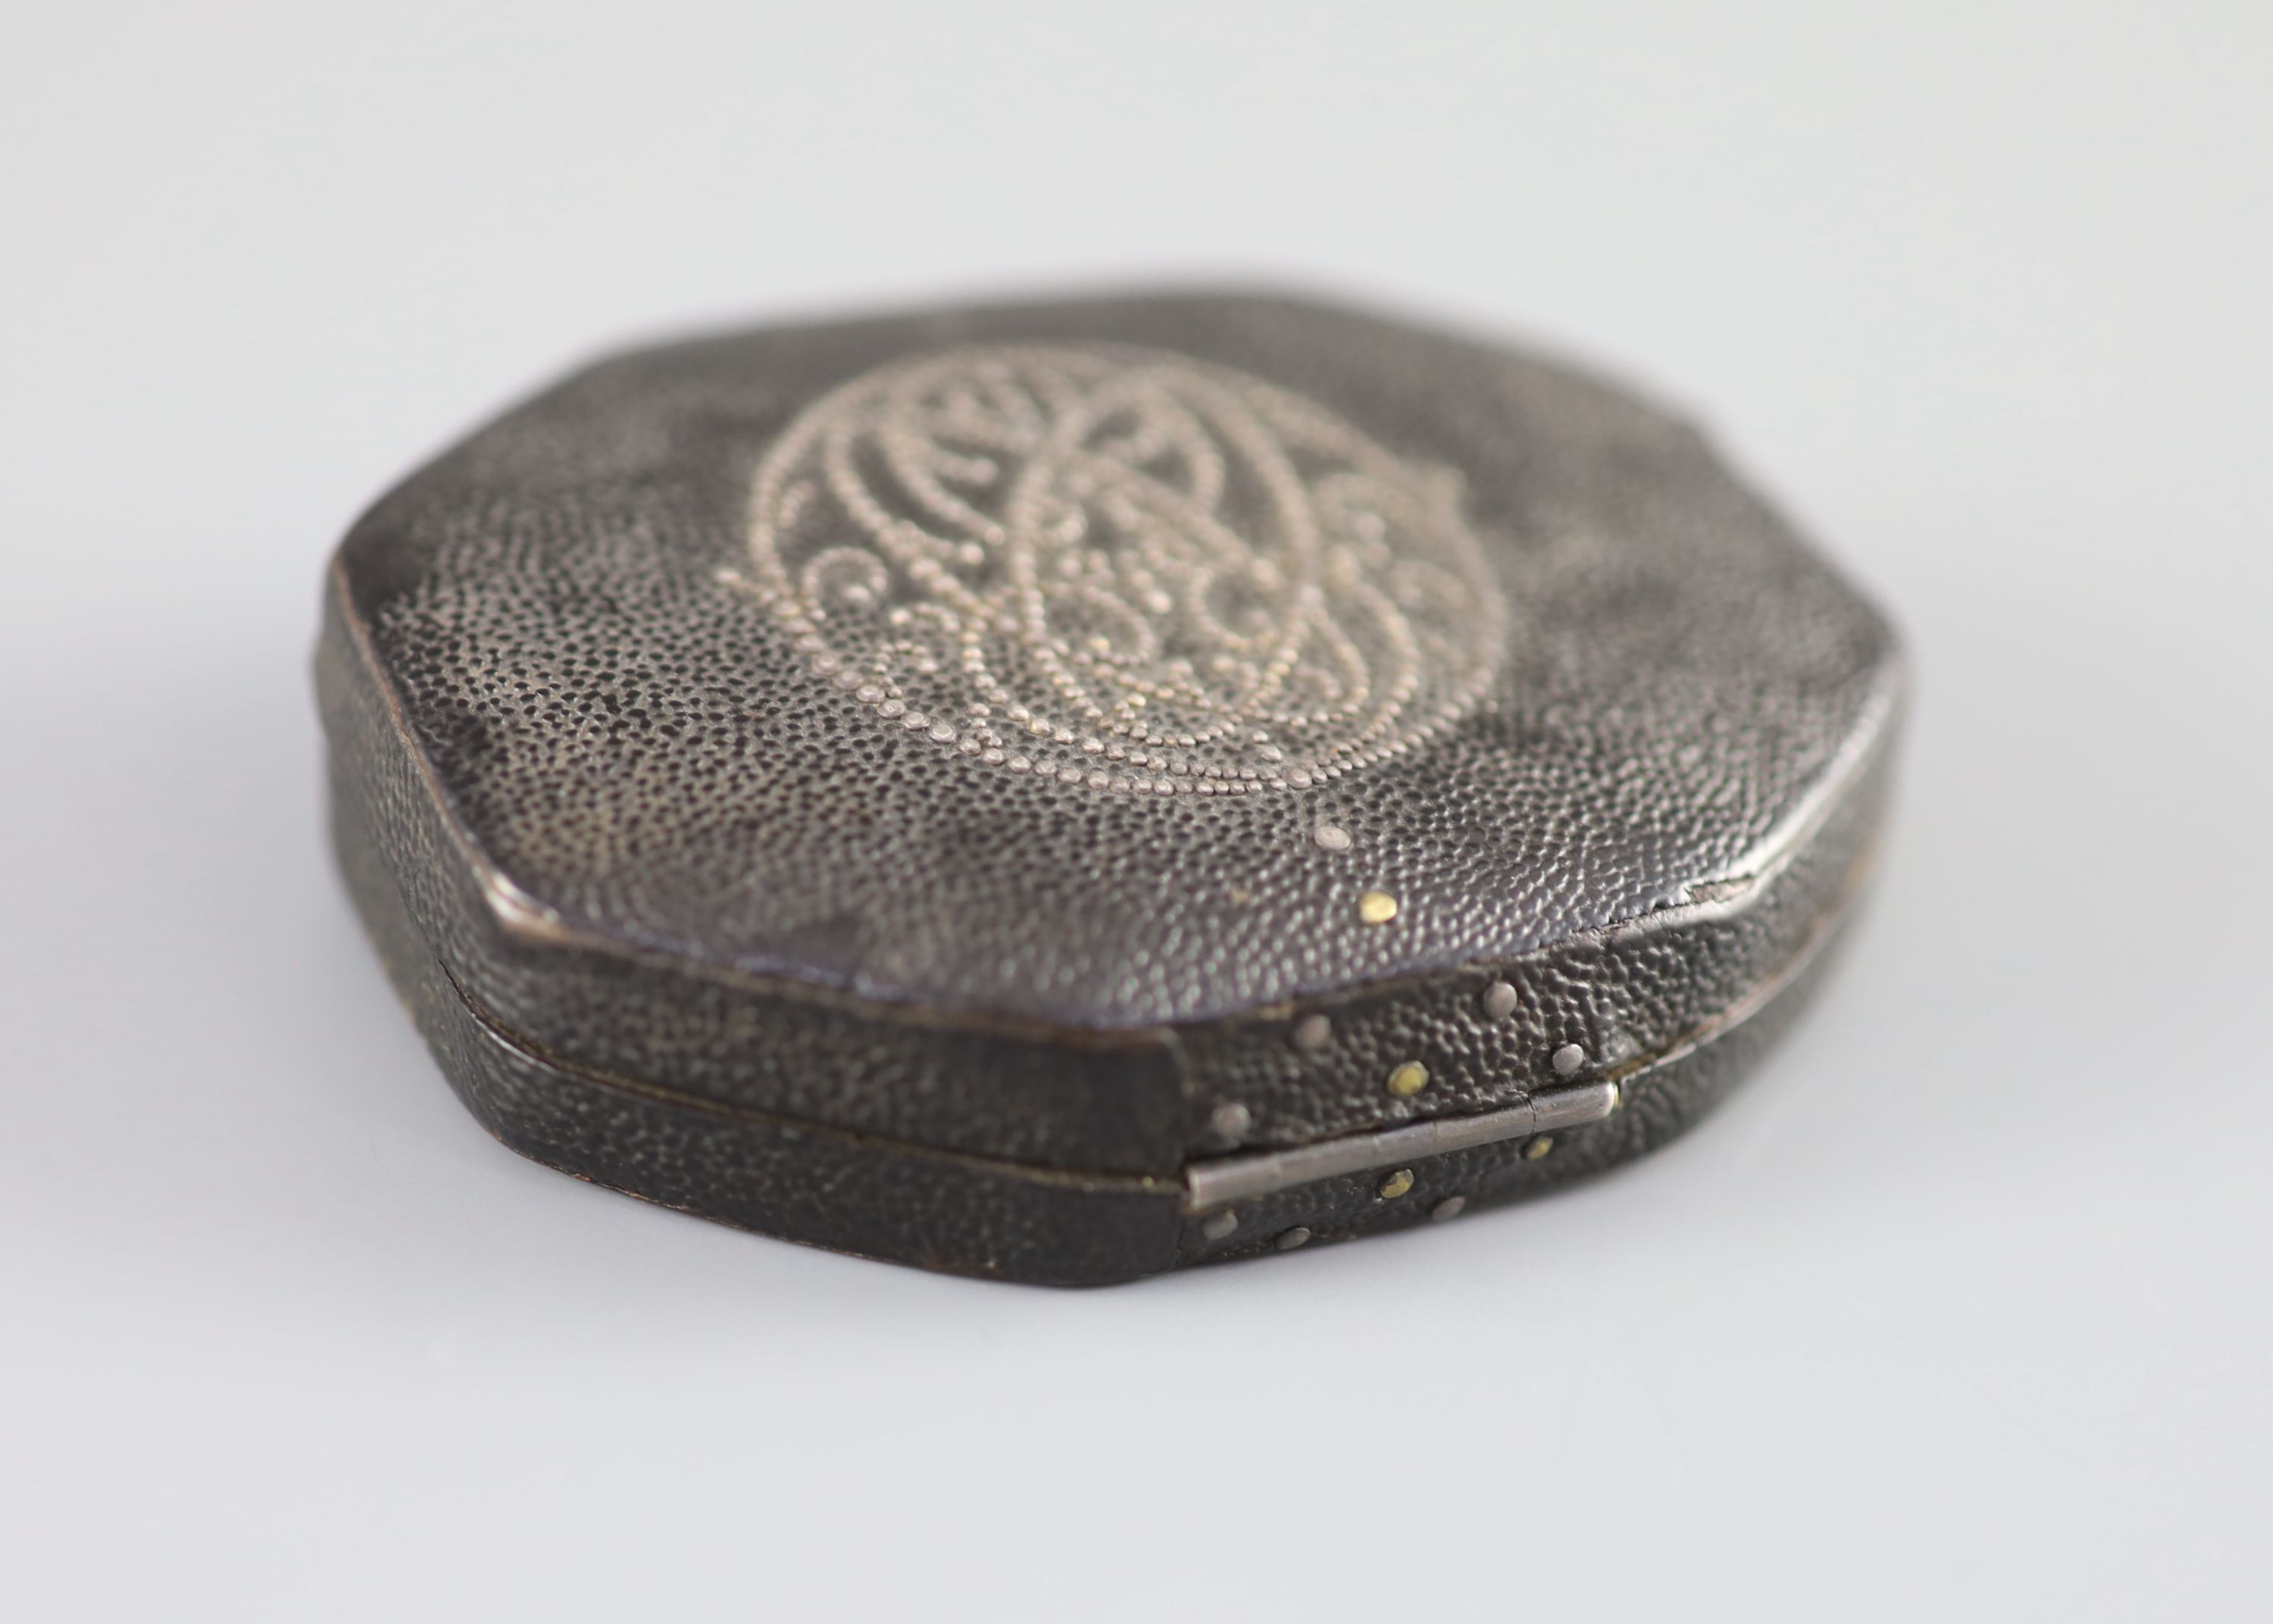 A cased French silver Butterfield-type pocket sundial / compass (scale) early 18th century 6 x 5cm